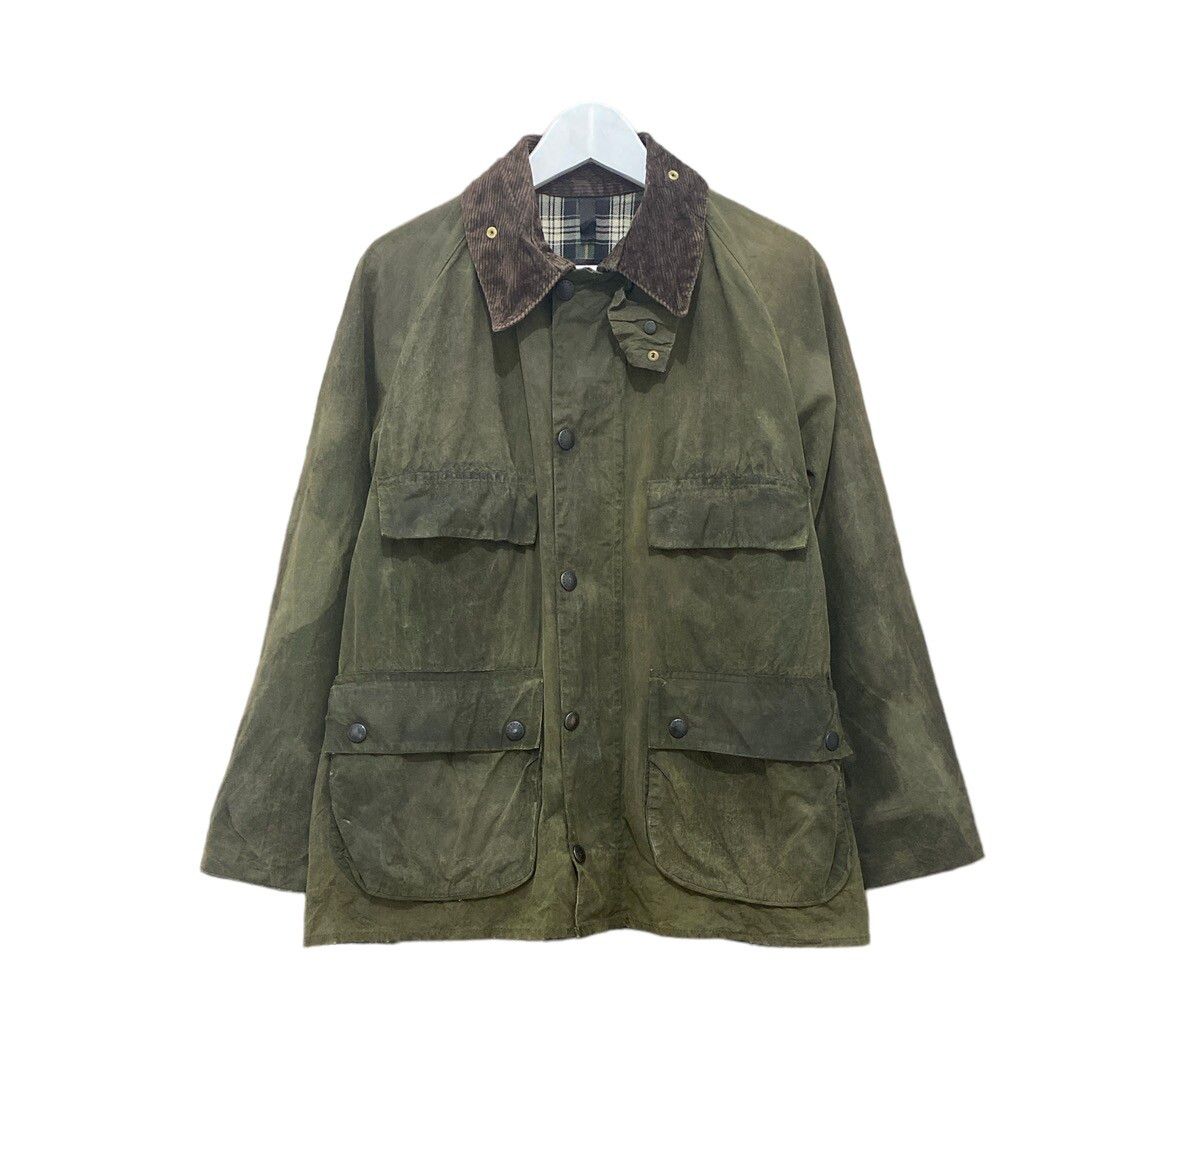 Barbour Bedale Waxed Cotton Jacket Made England - 4